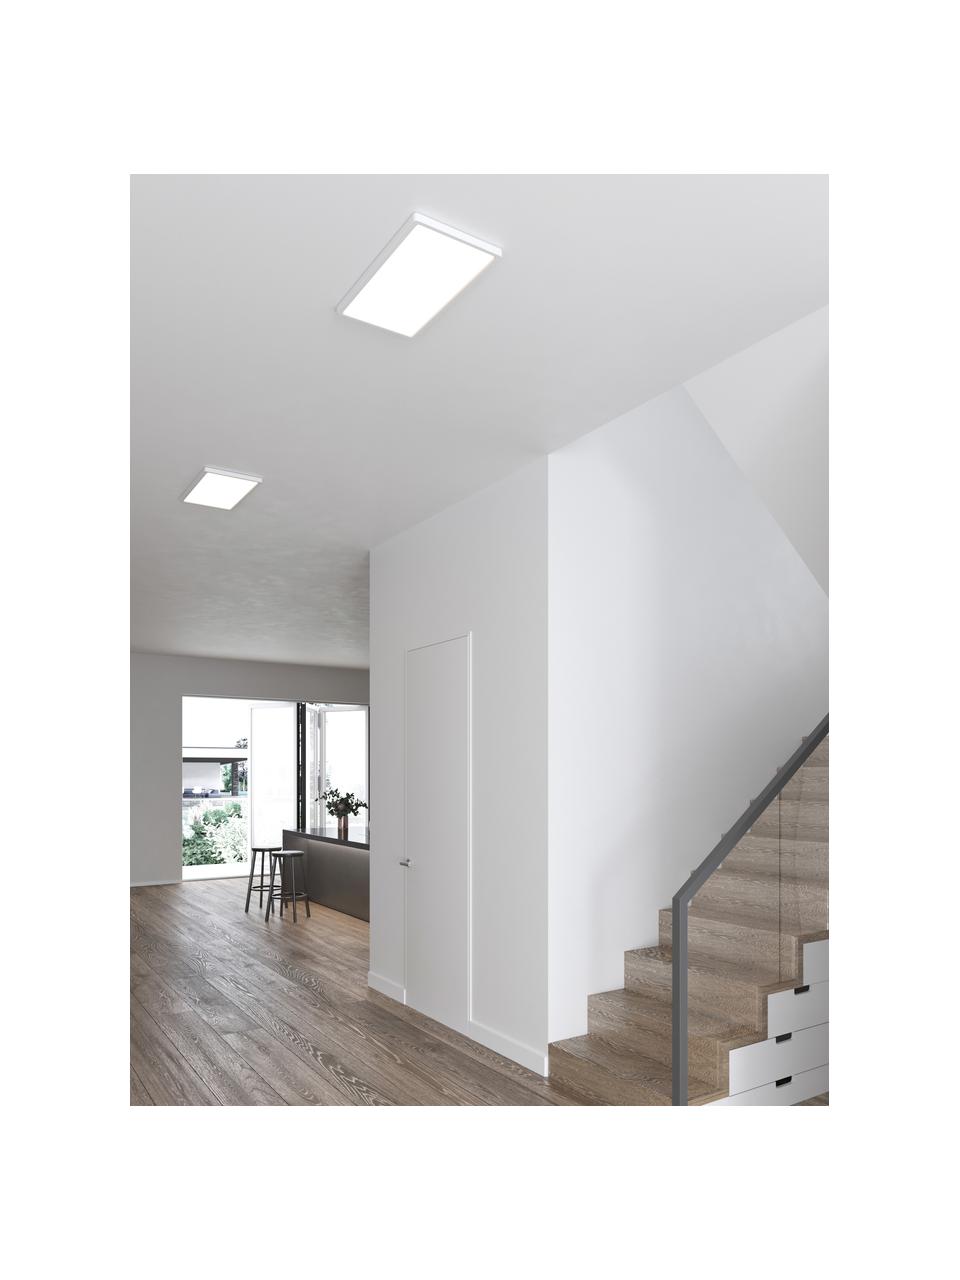 Dimmbares LED-Panel Harlow, Lampenschirm: Kunststoff, Weiss, B 60 x H 2 cm